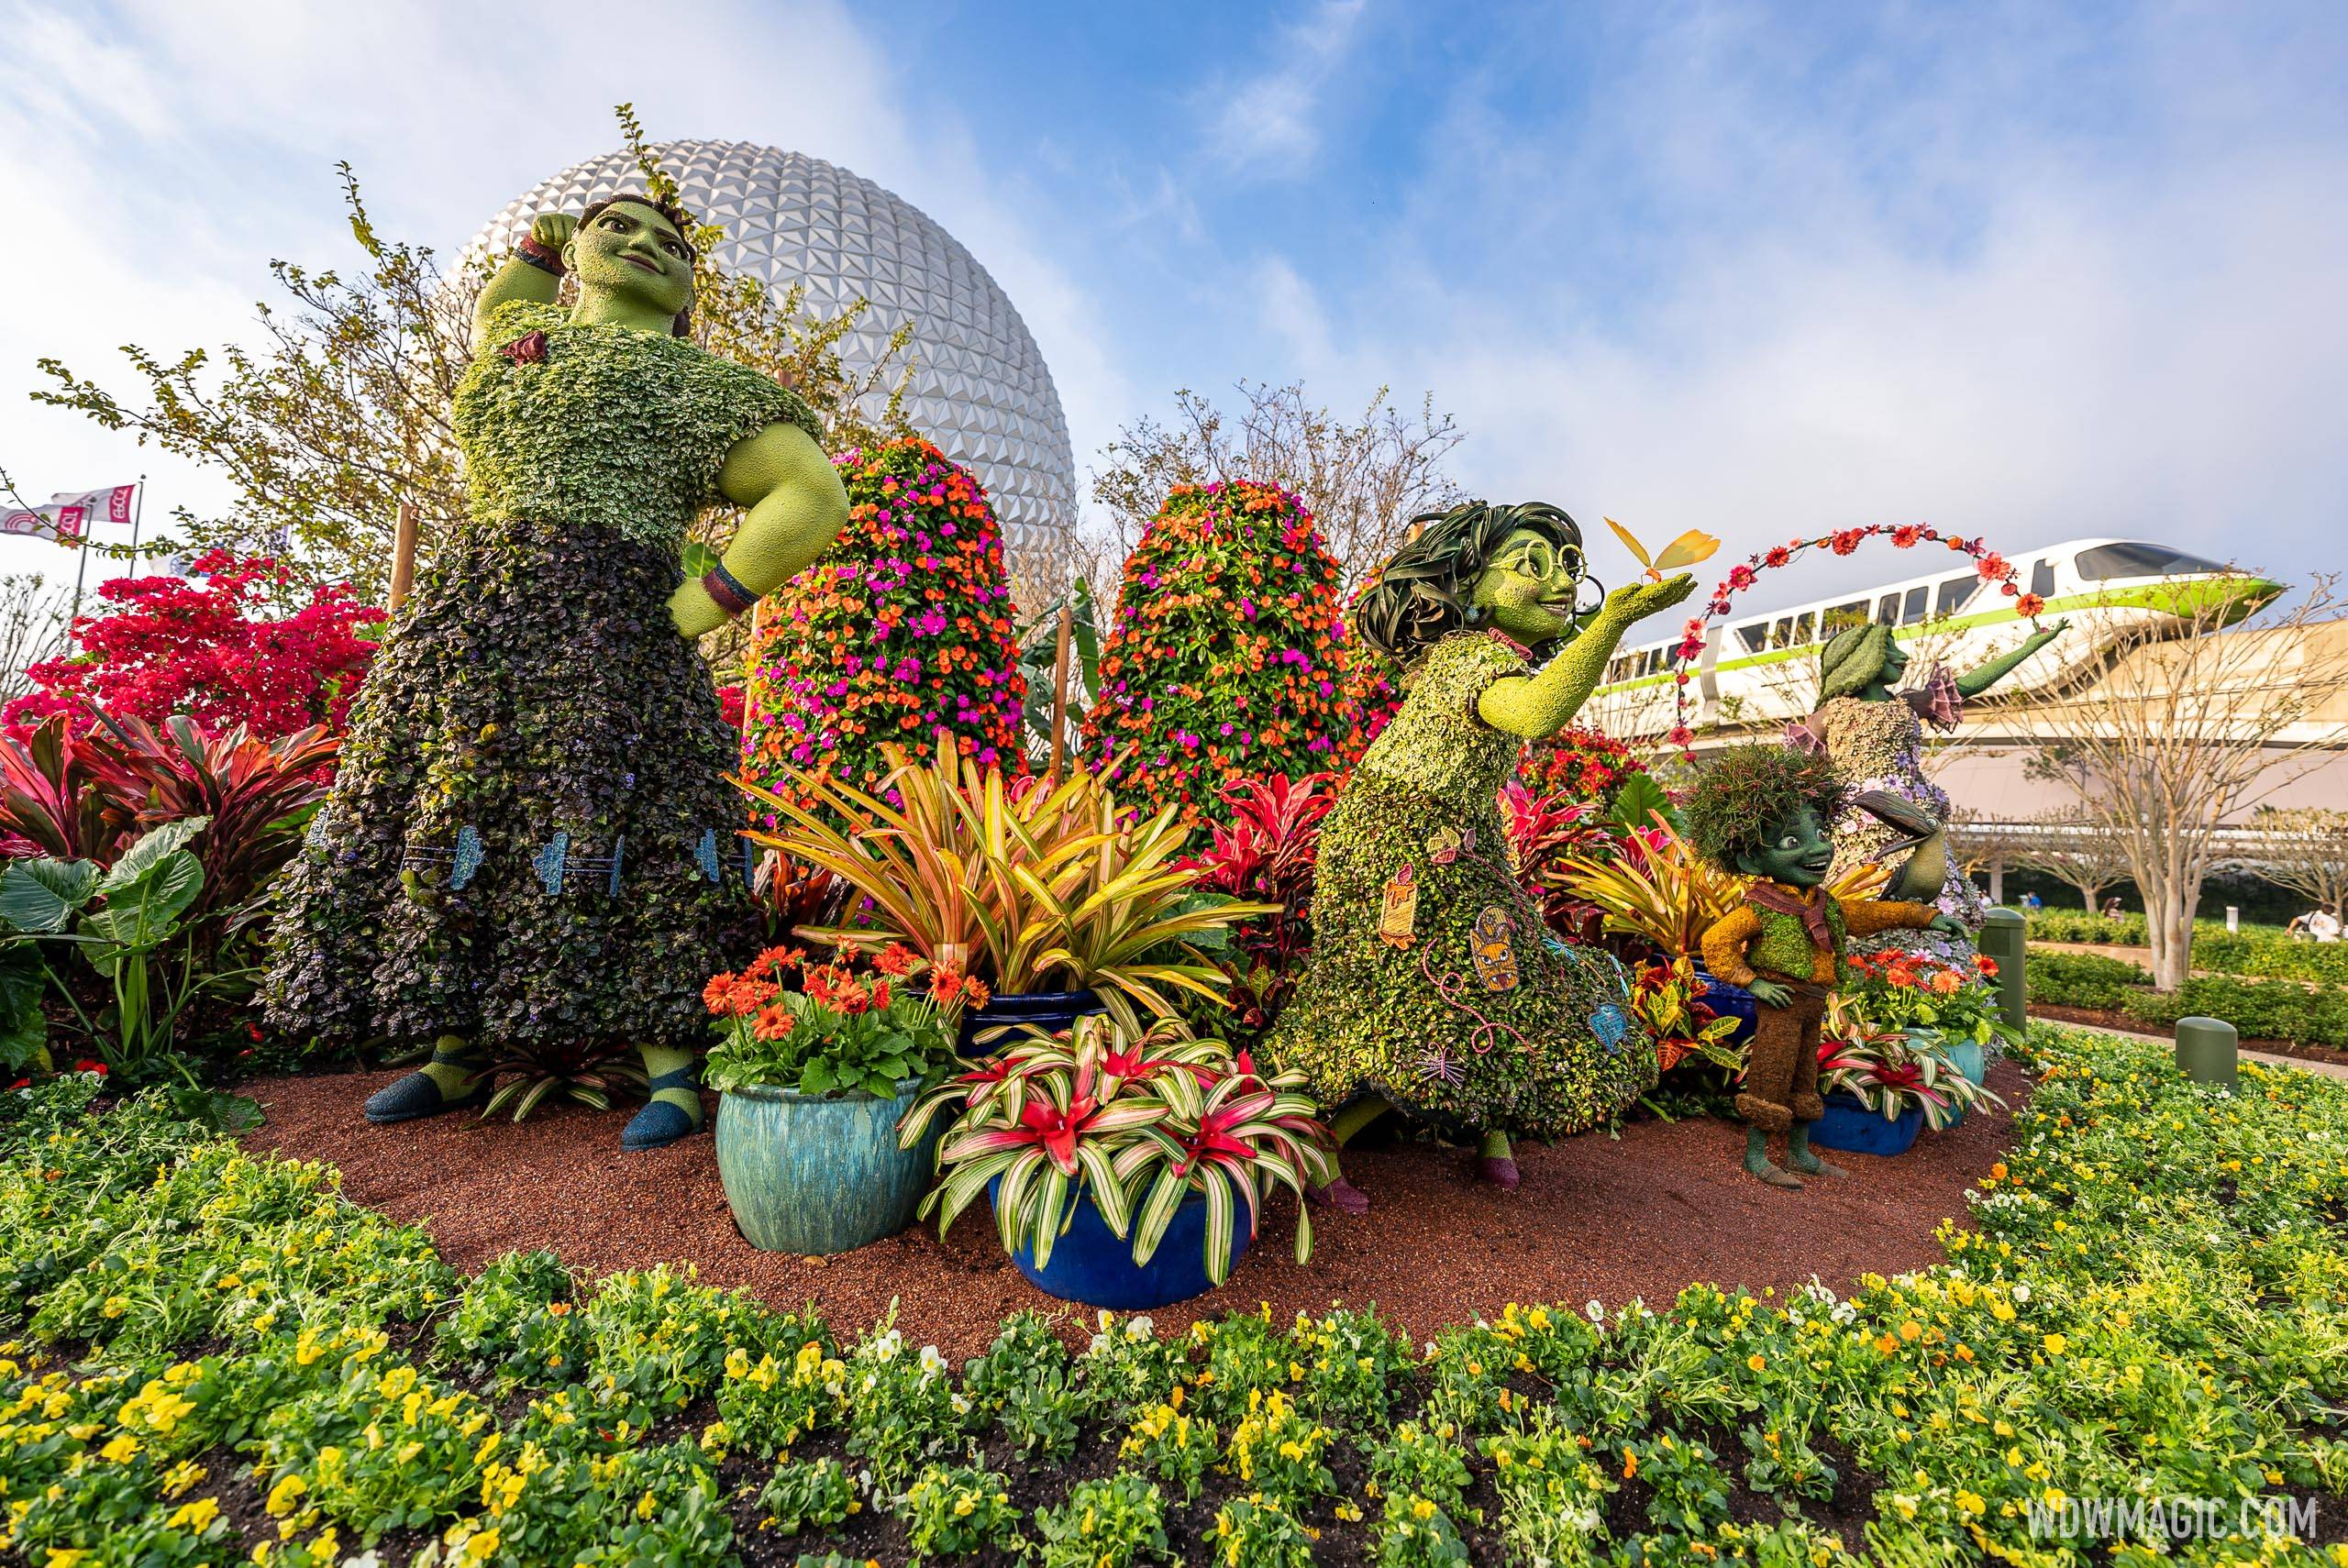 Watch a timelapse video of the new EPCOT International Flower and Garden Festival Encanto topiaries installation